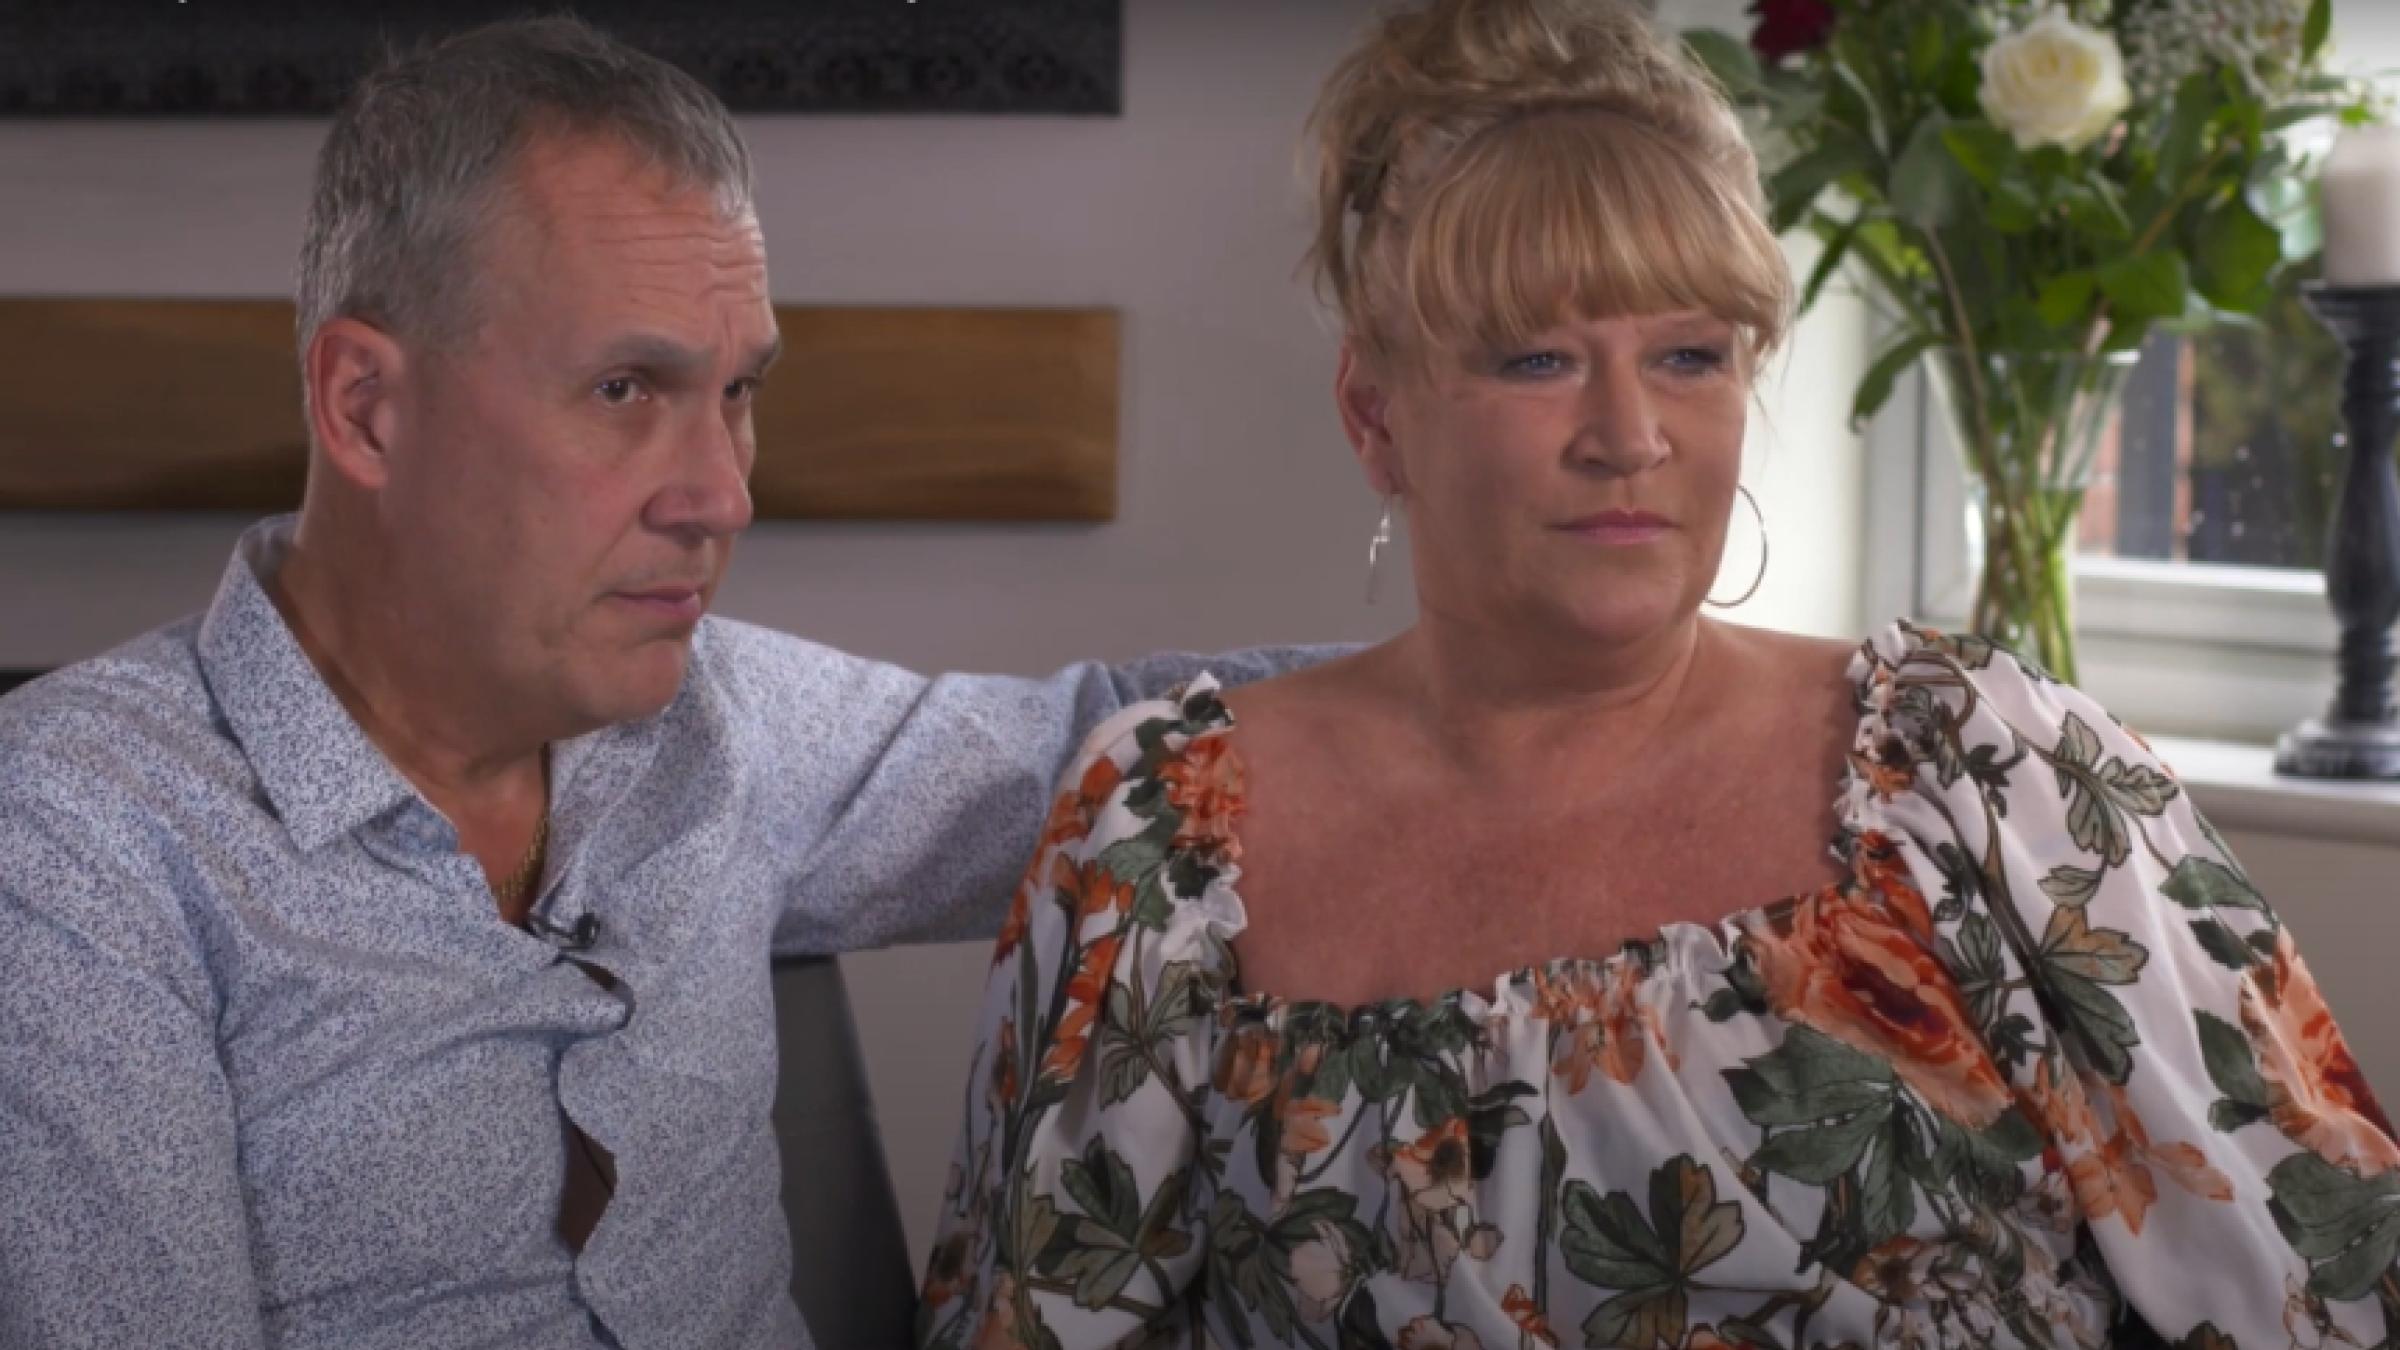 Paul and Lisa sat side-by-side in conversation with Alzheimer's Society